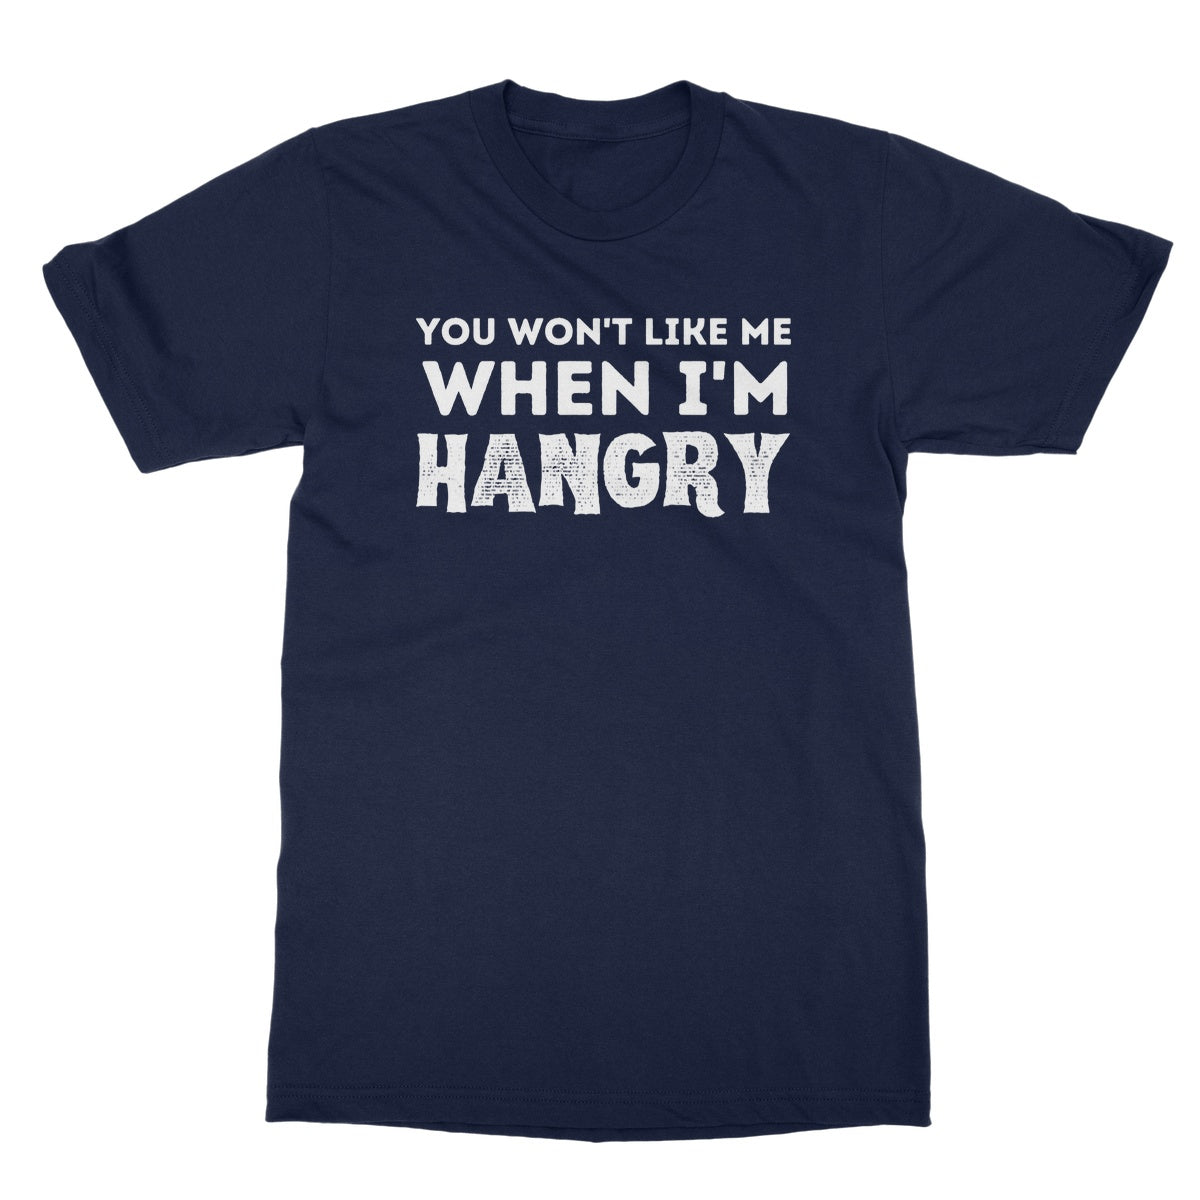 you won't like me when I'm hangry t shirt navy